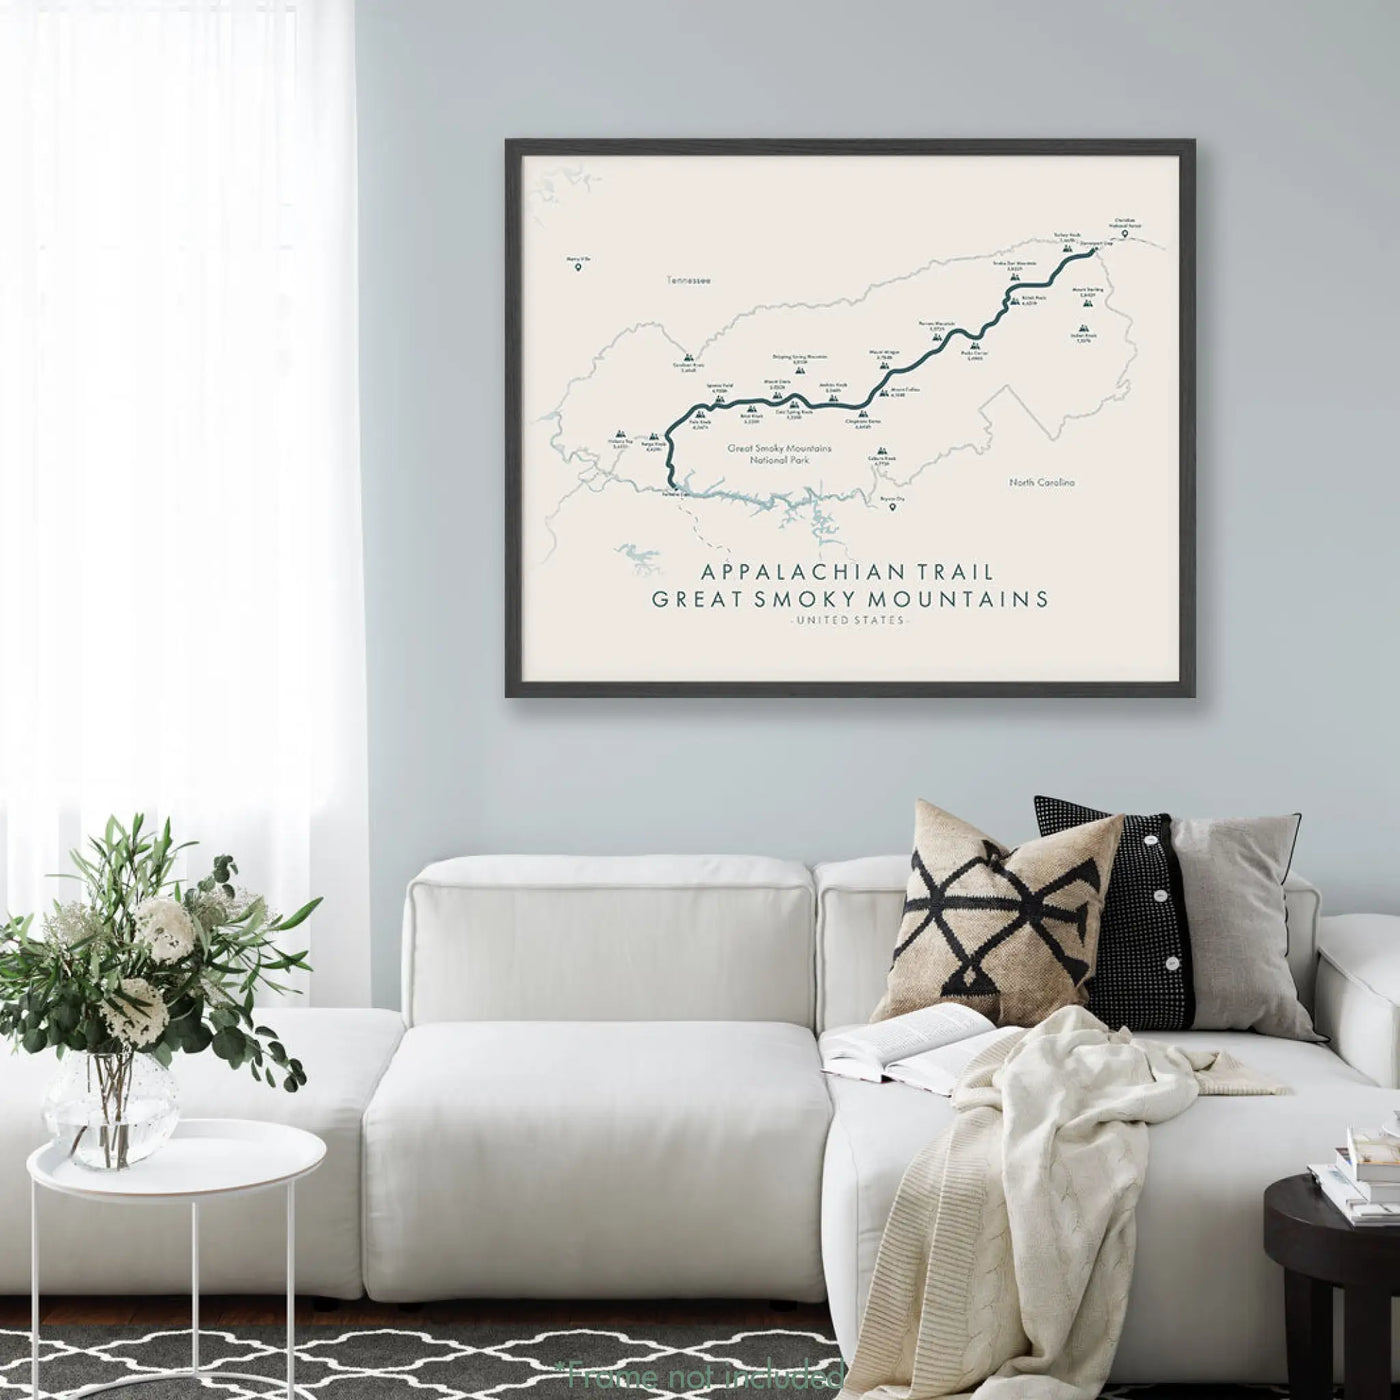 Trail Poster of Appalachian Trail - Great Smoky Mountains - Beige Mockup